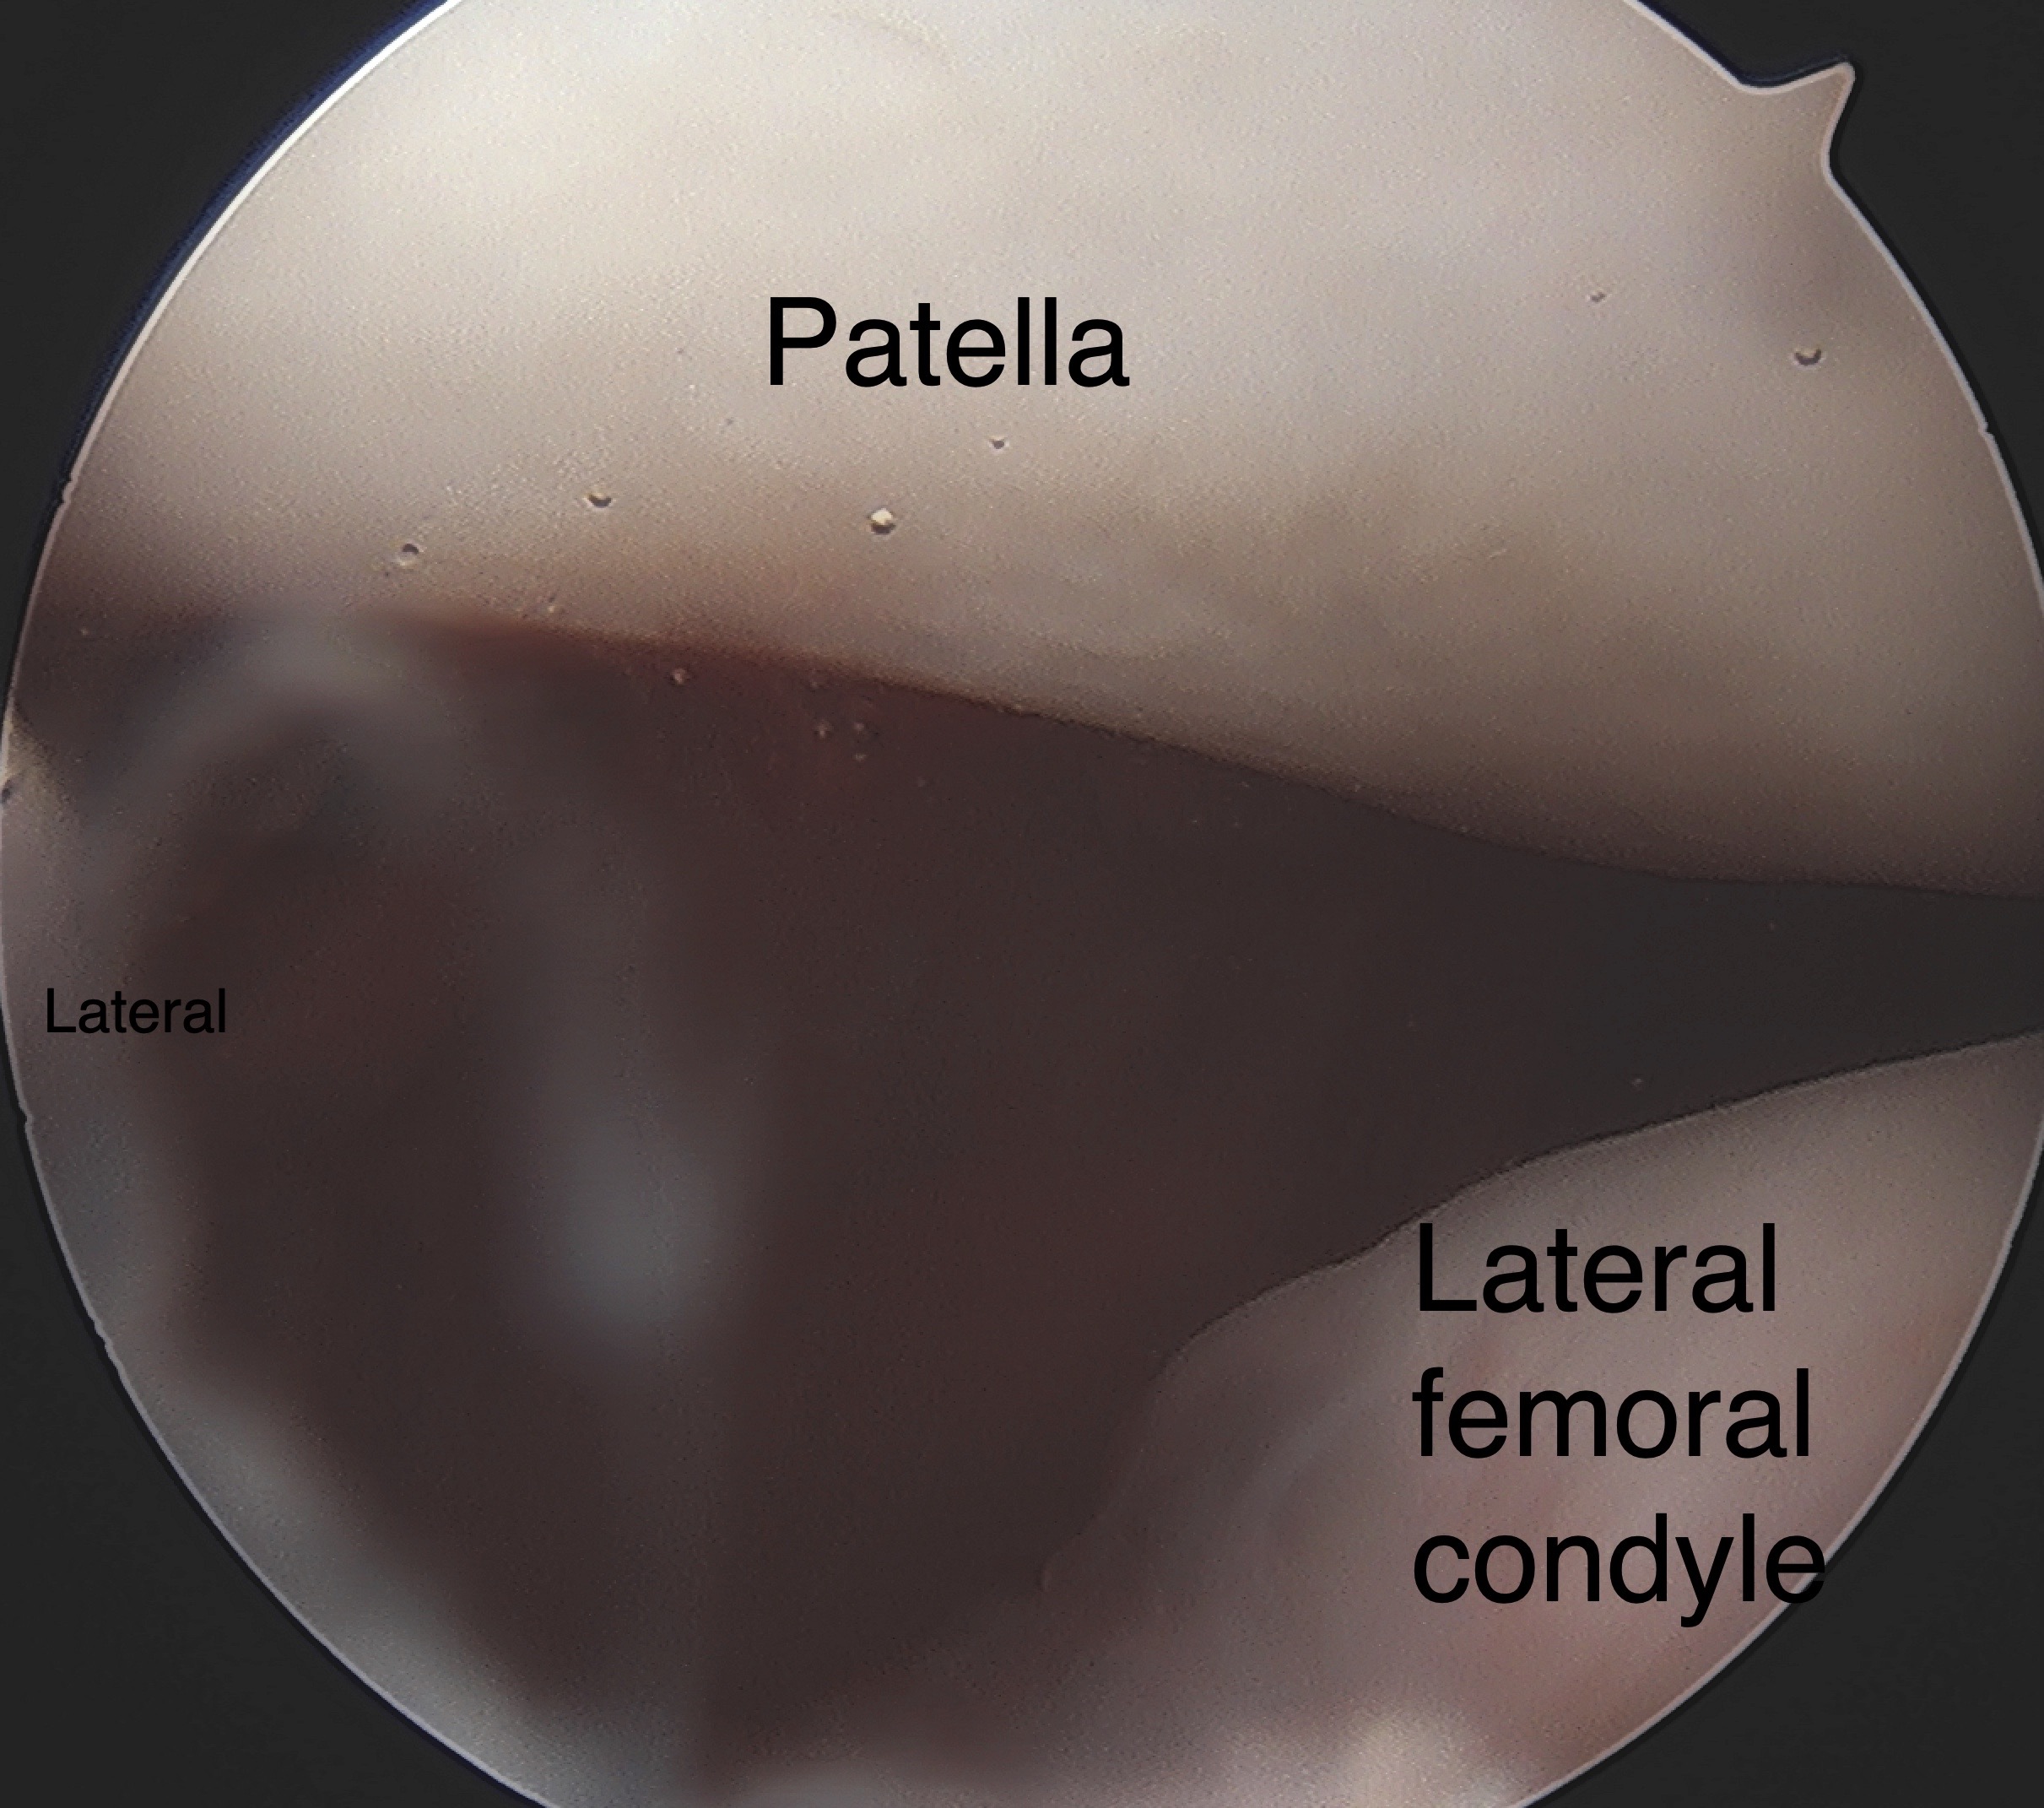 Right knee arthroscopic image demonstrating static lateral patellar subluxation during a diagnostic knee arthroscopy followed by medial patellofemoral ligament reconstruction using semitendinosus allograft tendon